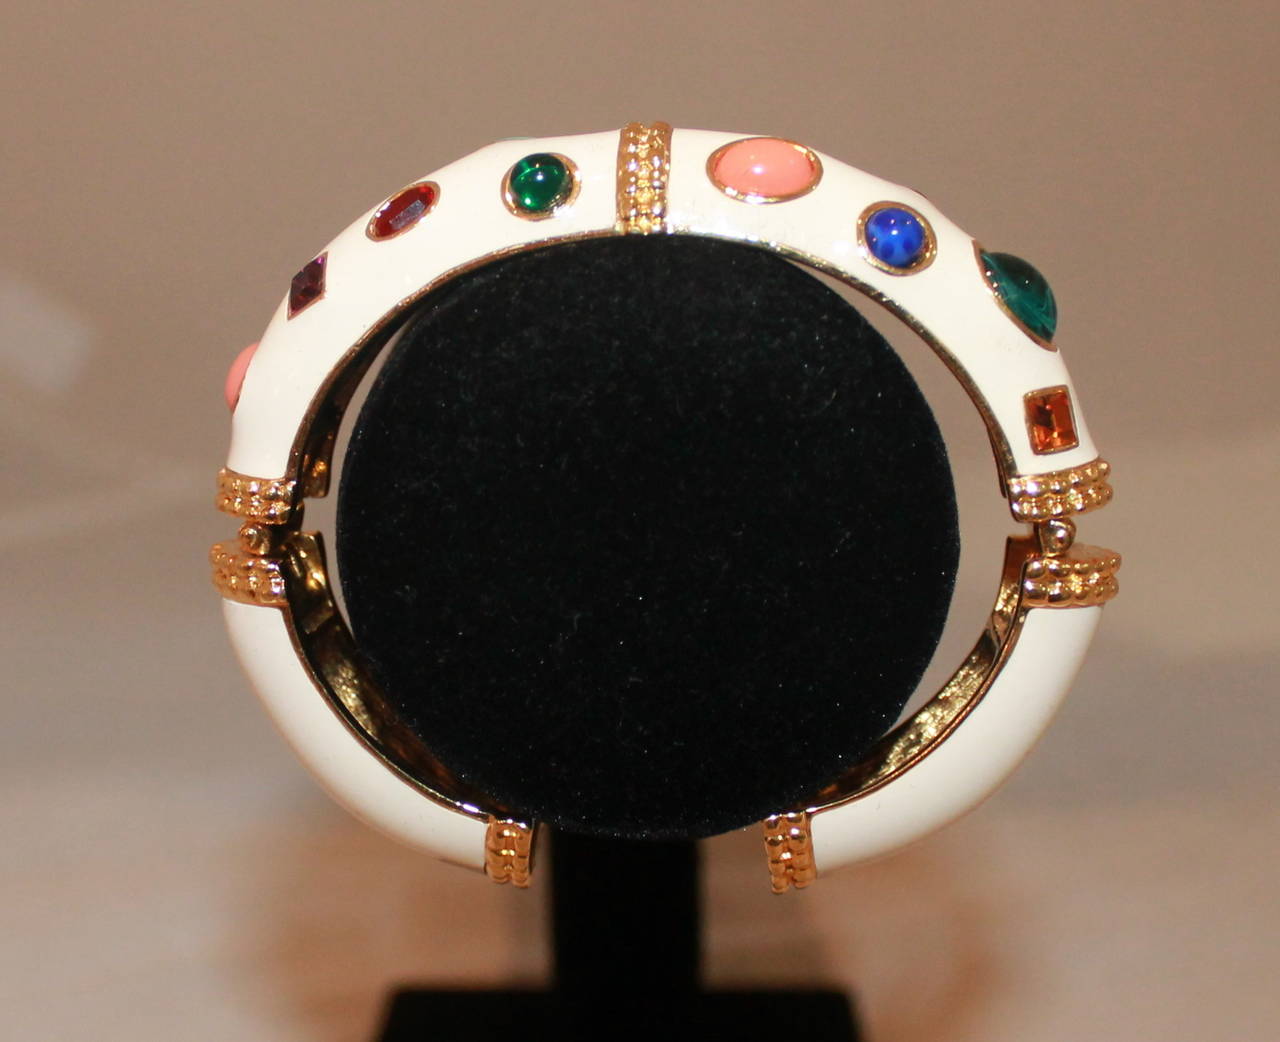 Kenneth Jay Lane White Enamel & Multi Stone Bangle. This piece is in excellent condition with no stones missing. The stones are blues, pinks, reds, and greens. 

Width- 0.65